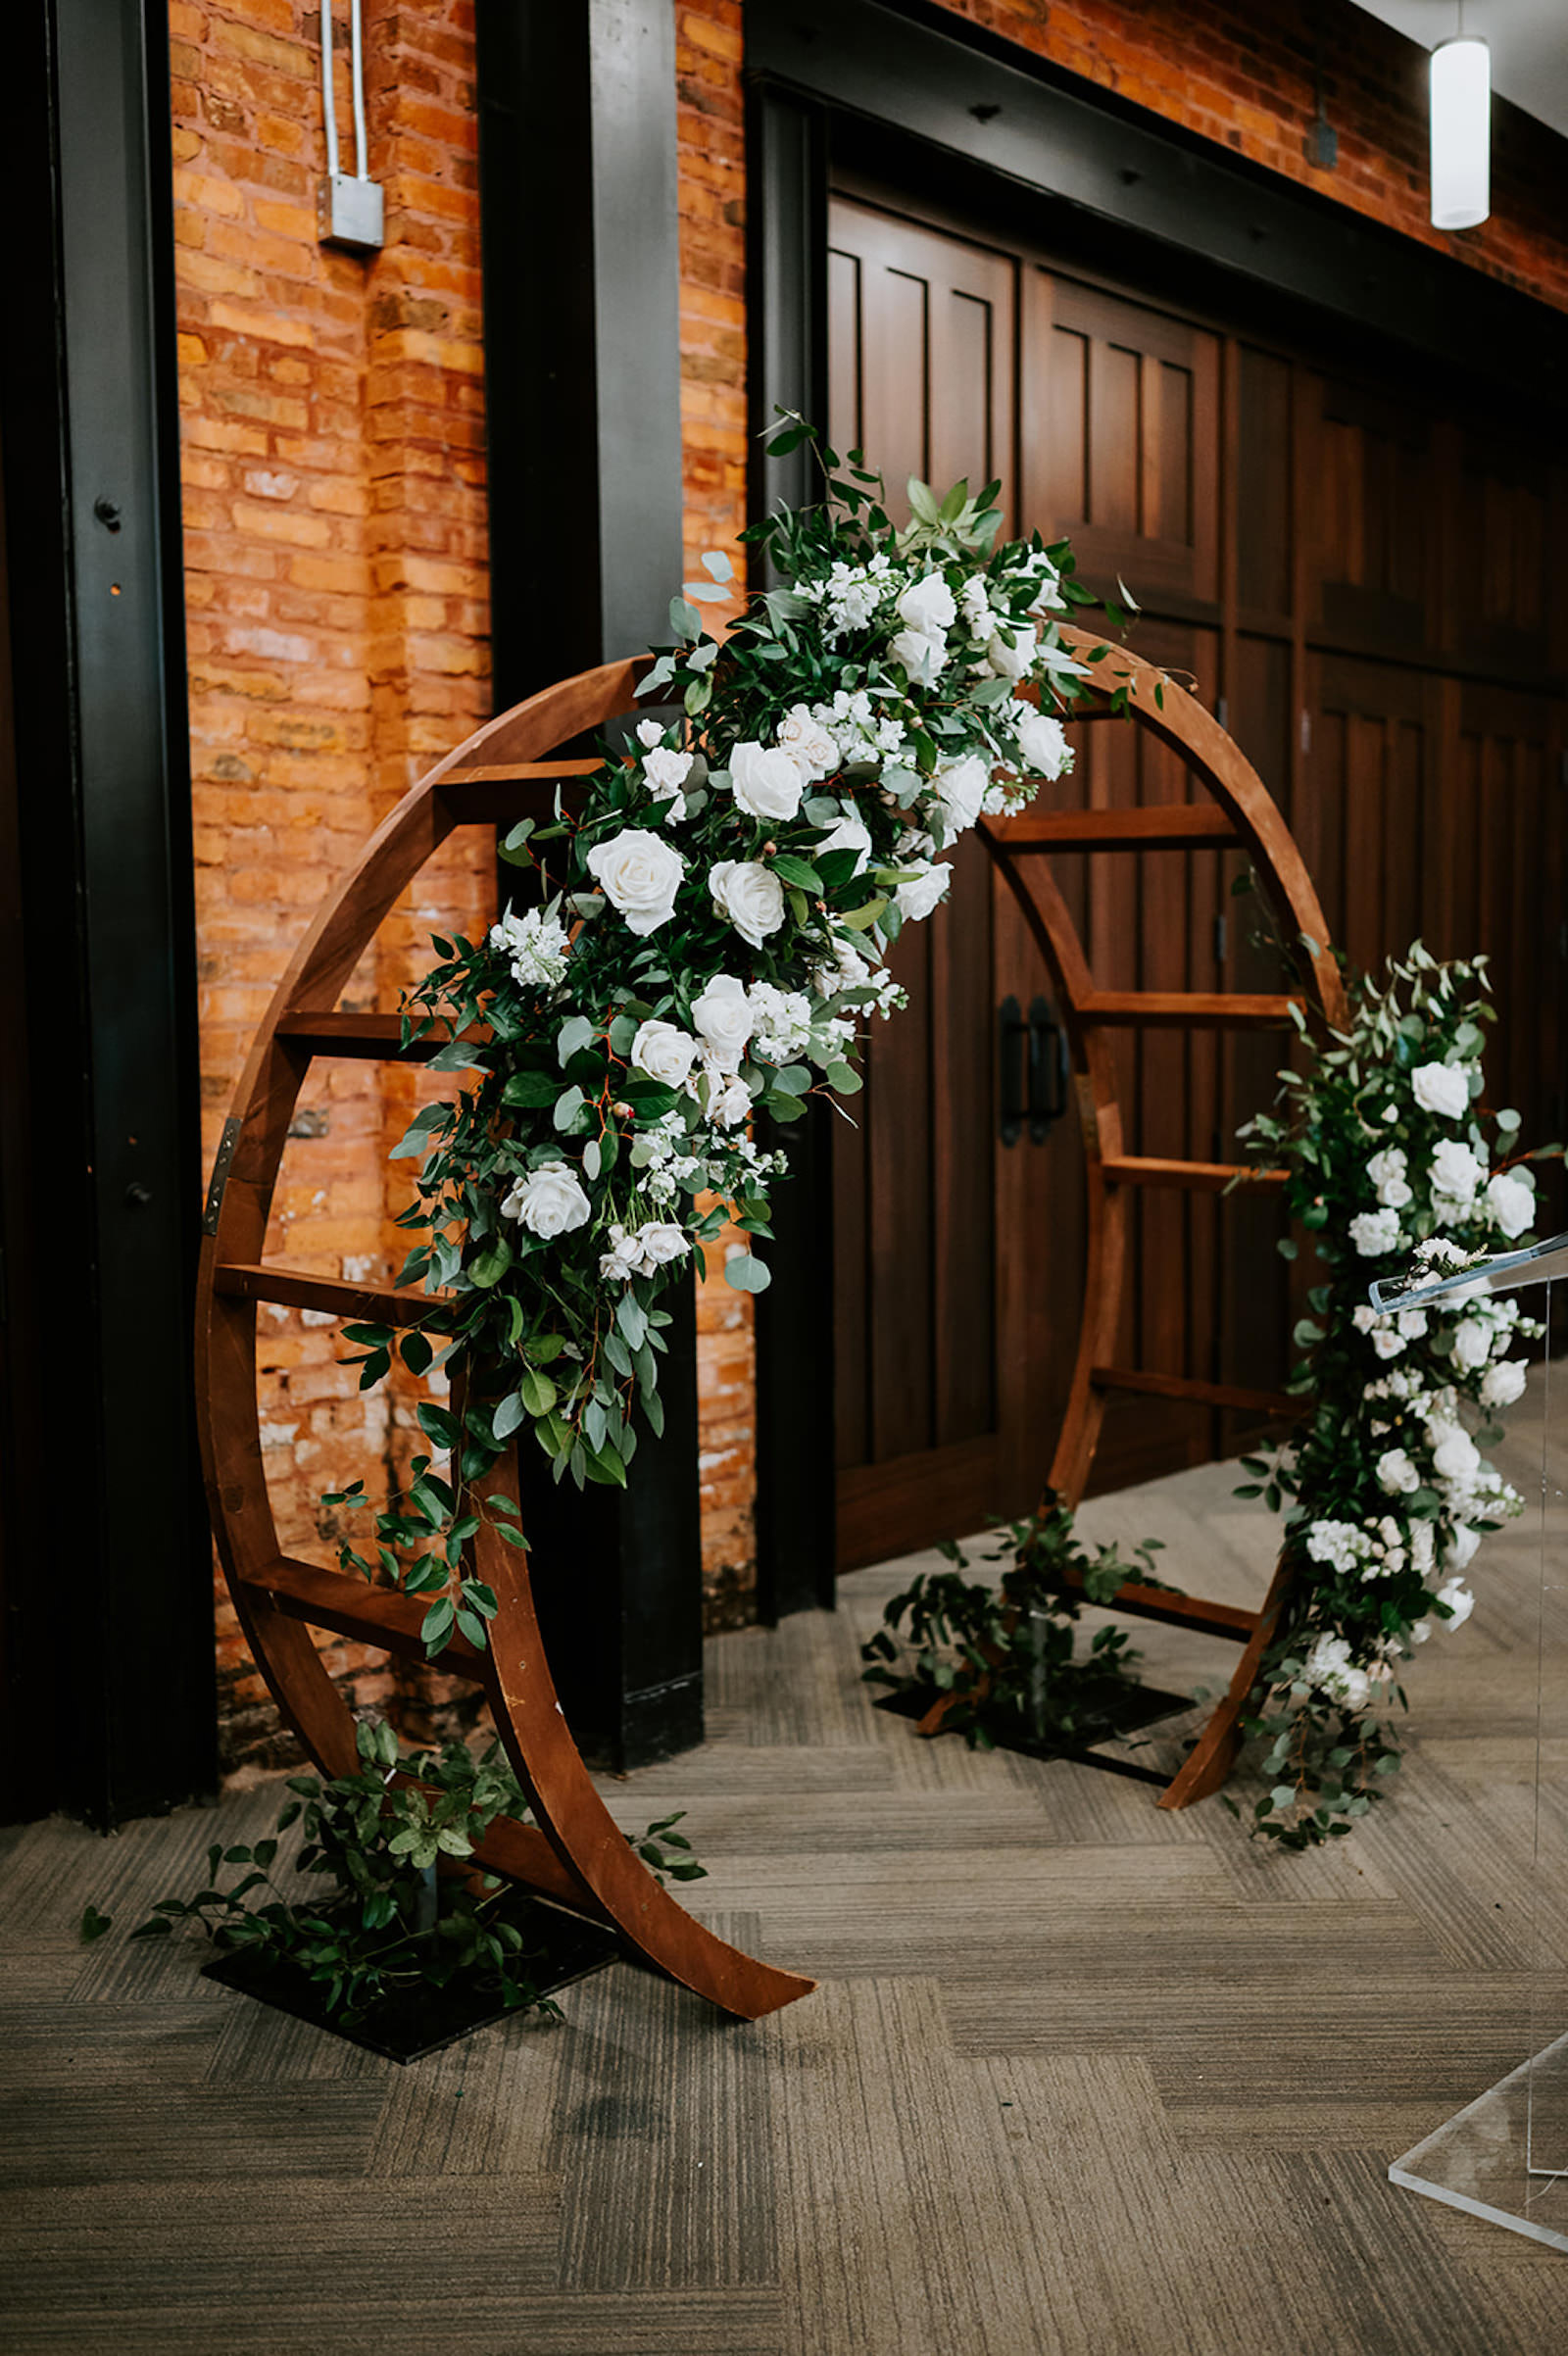 Round Wooden Wedding Arch Ideas | Classic White Rose and Greenery Flower Arrangement Inspiration